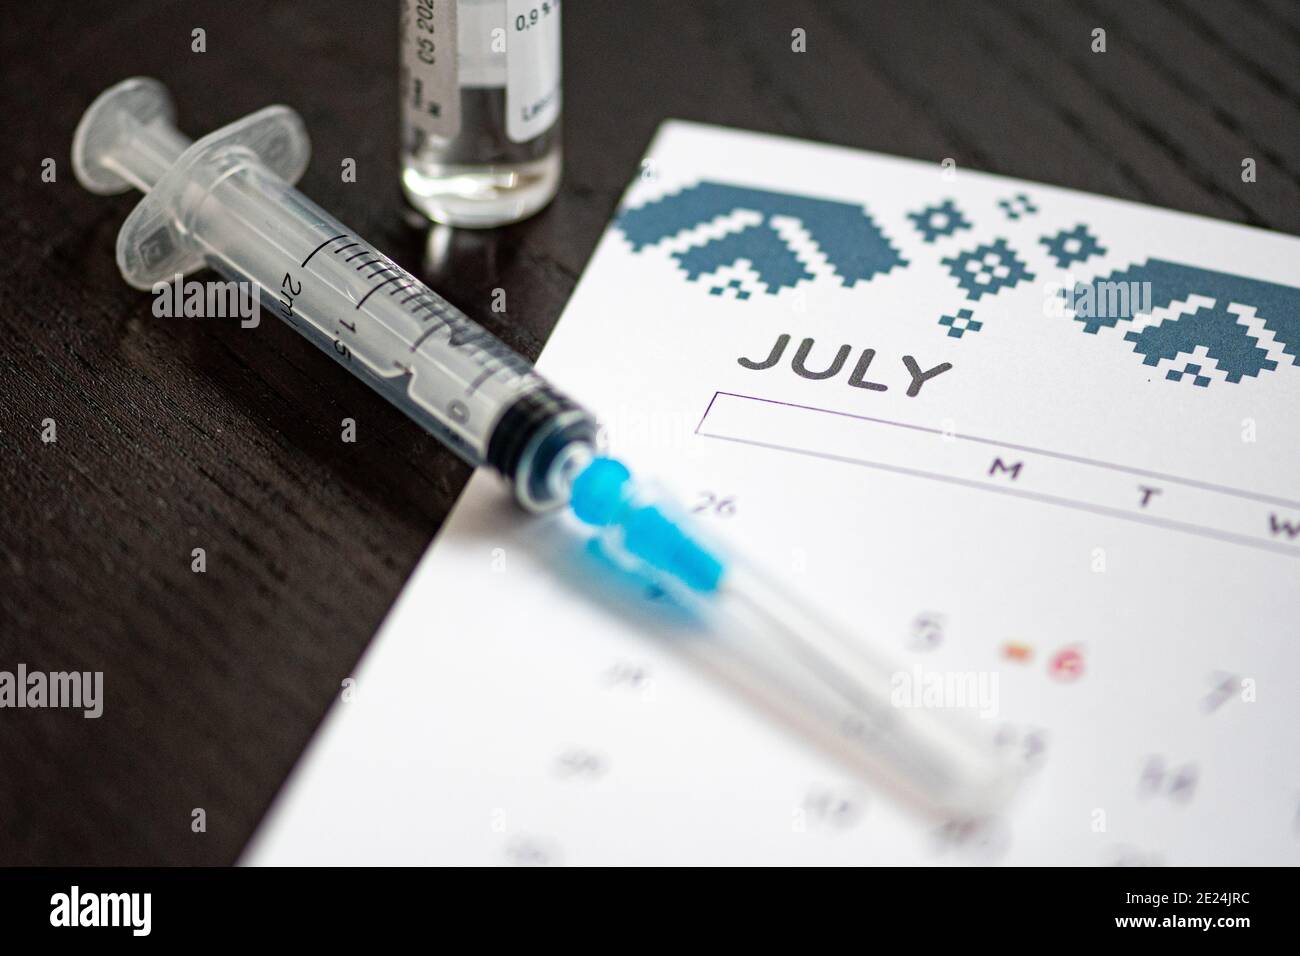 Syringe, vial and calendar with month of July on a black table ready to be used. Covid or Coronavirus vaccine background Stock Photo